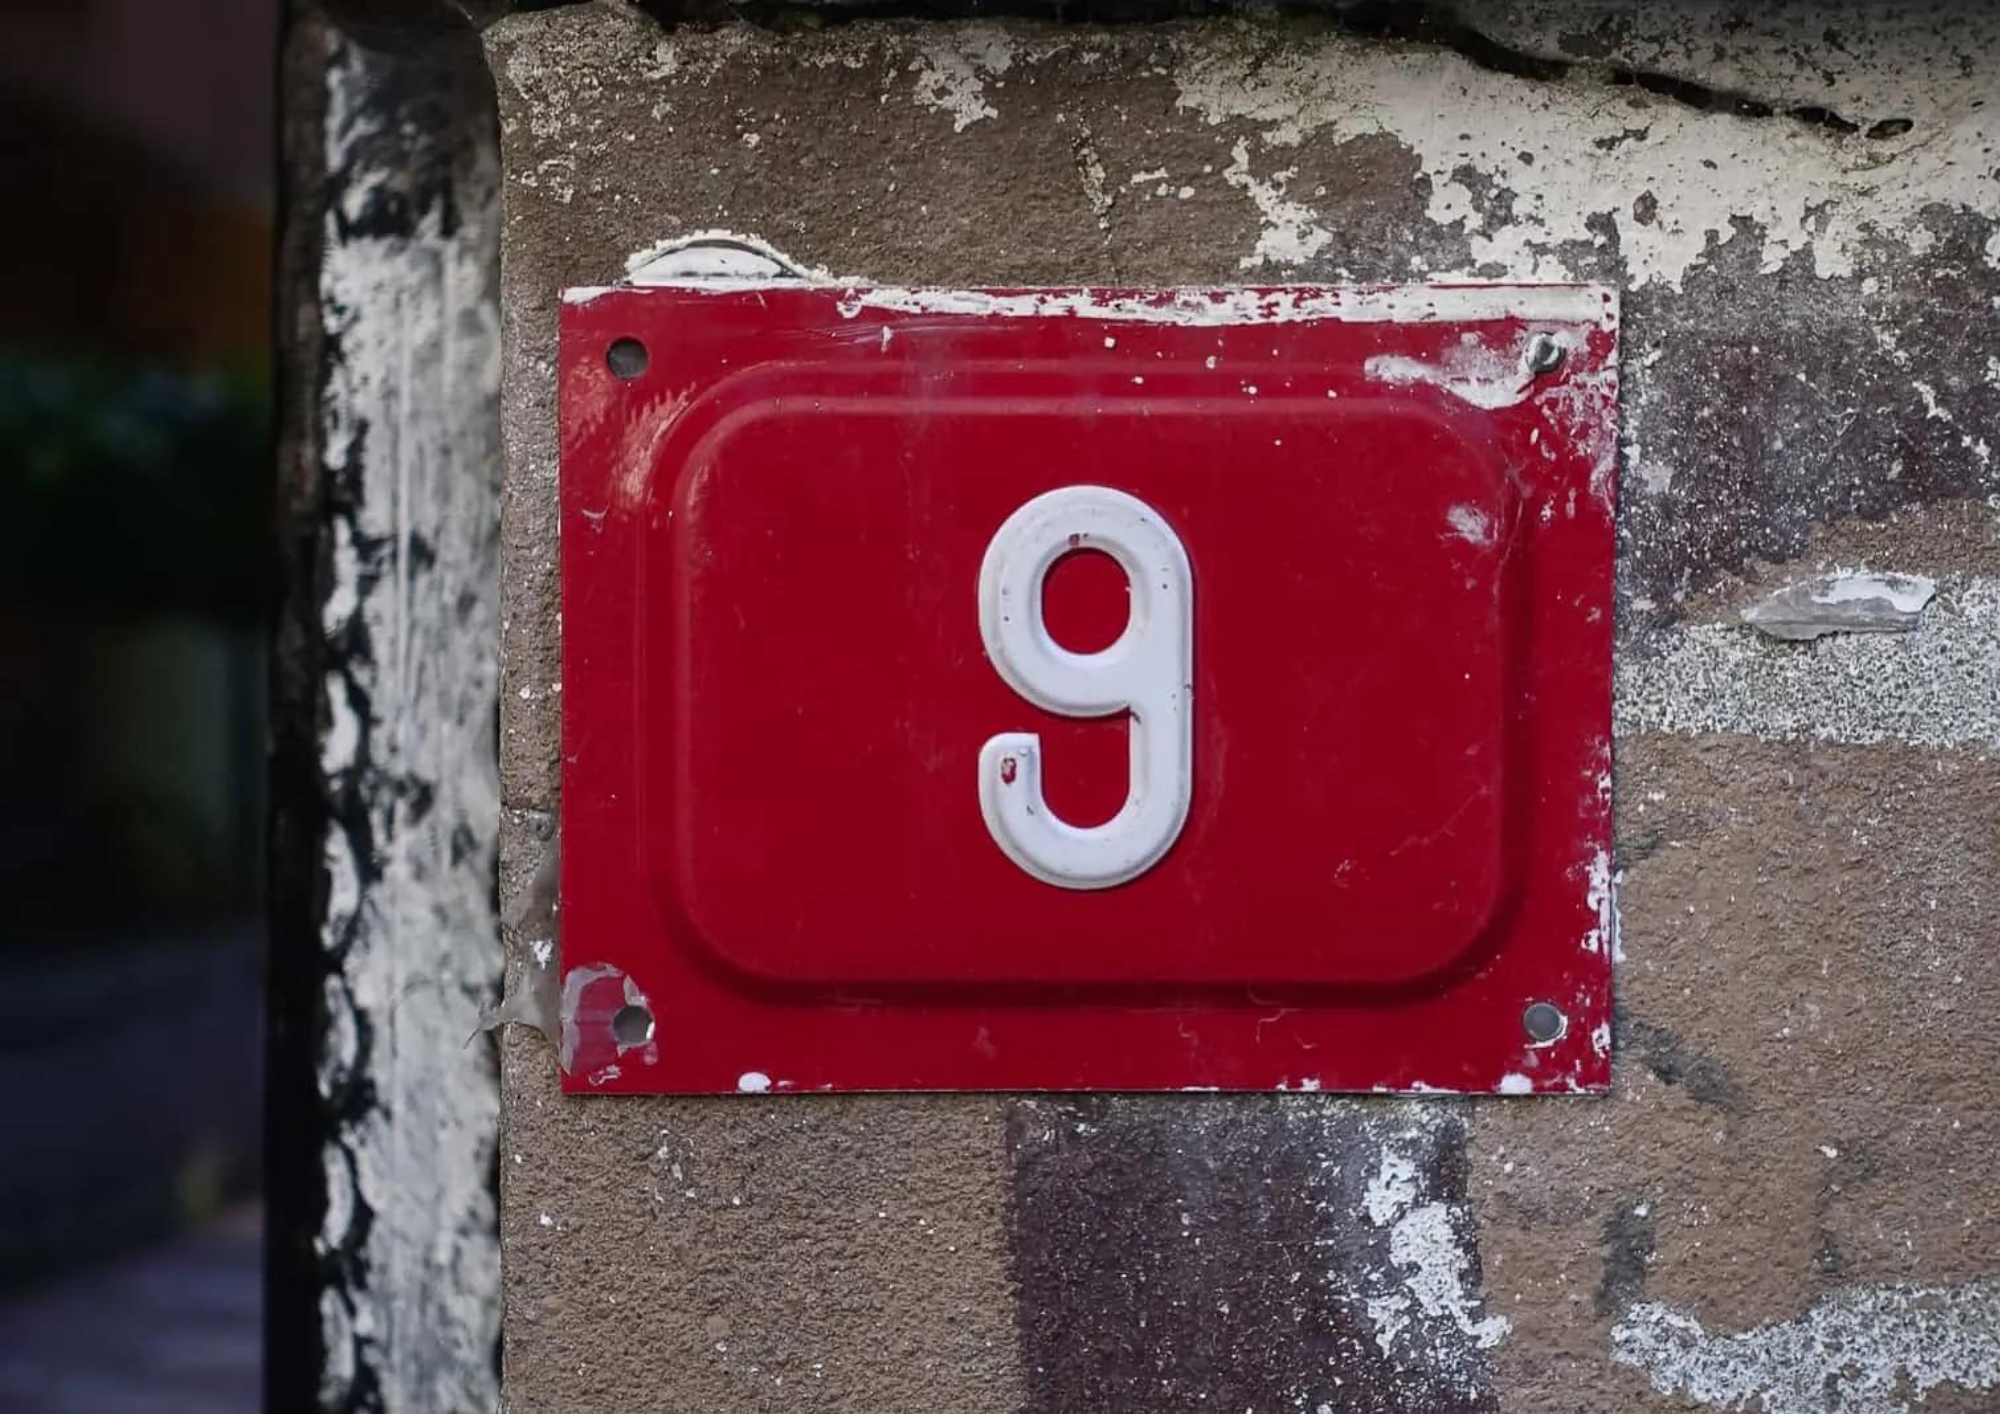 A brick wall having a red metal plate with number 9